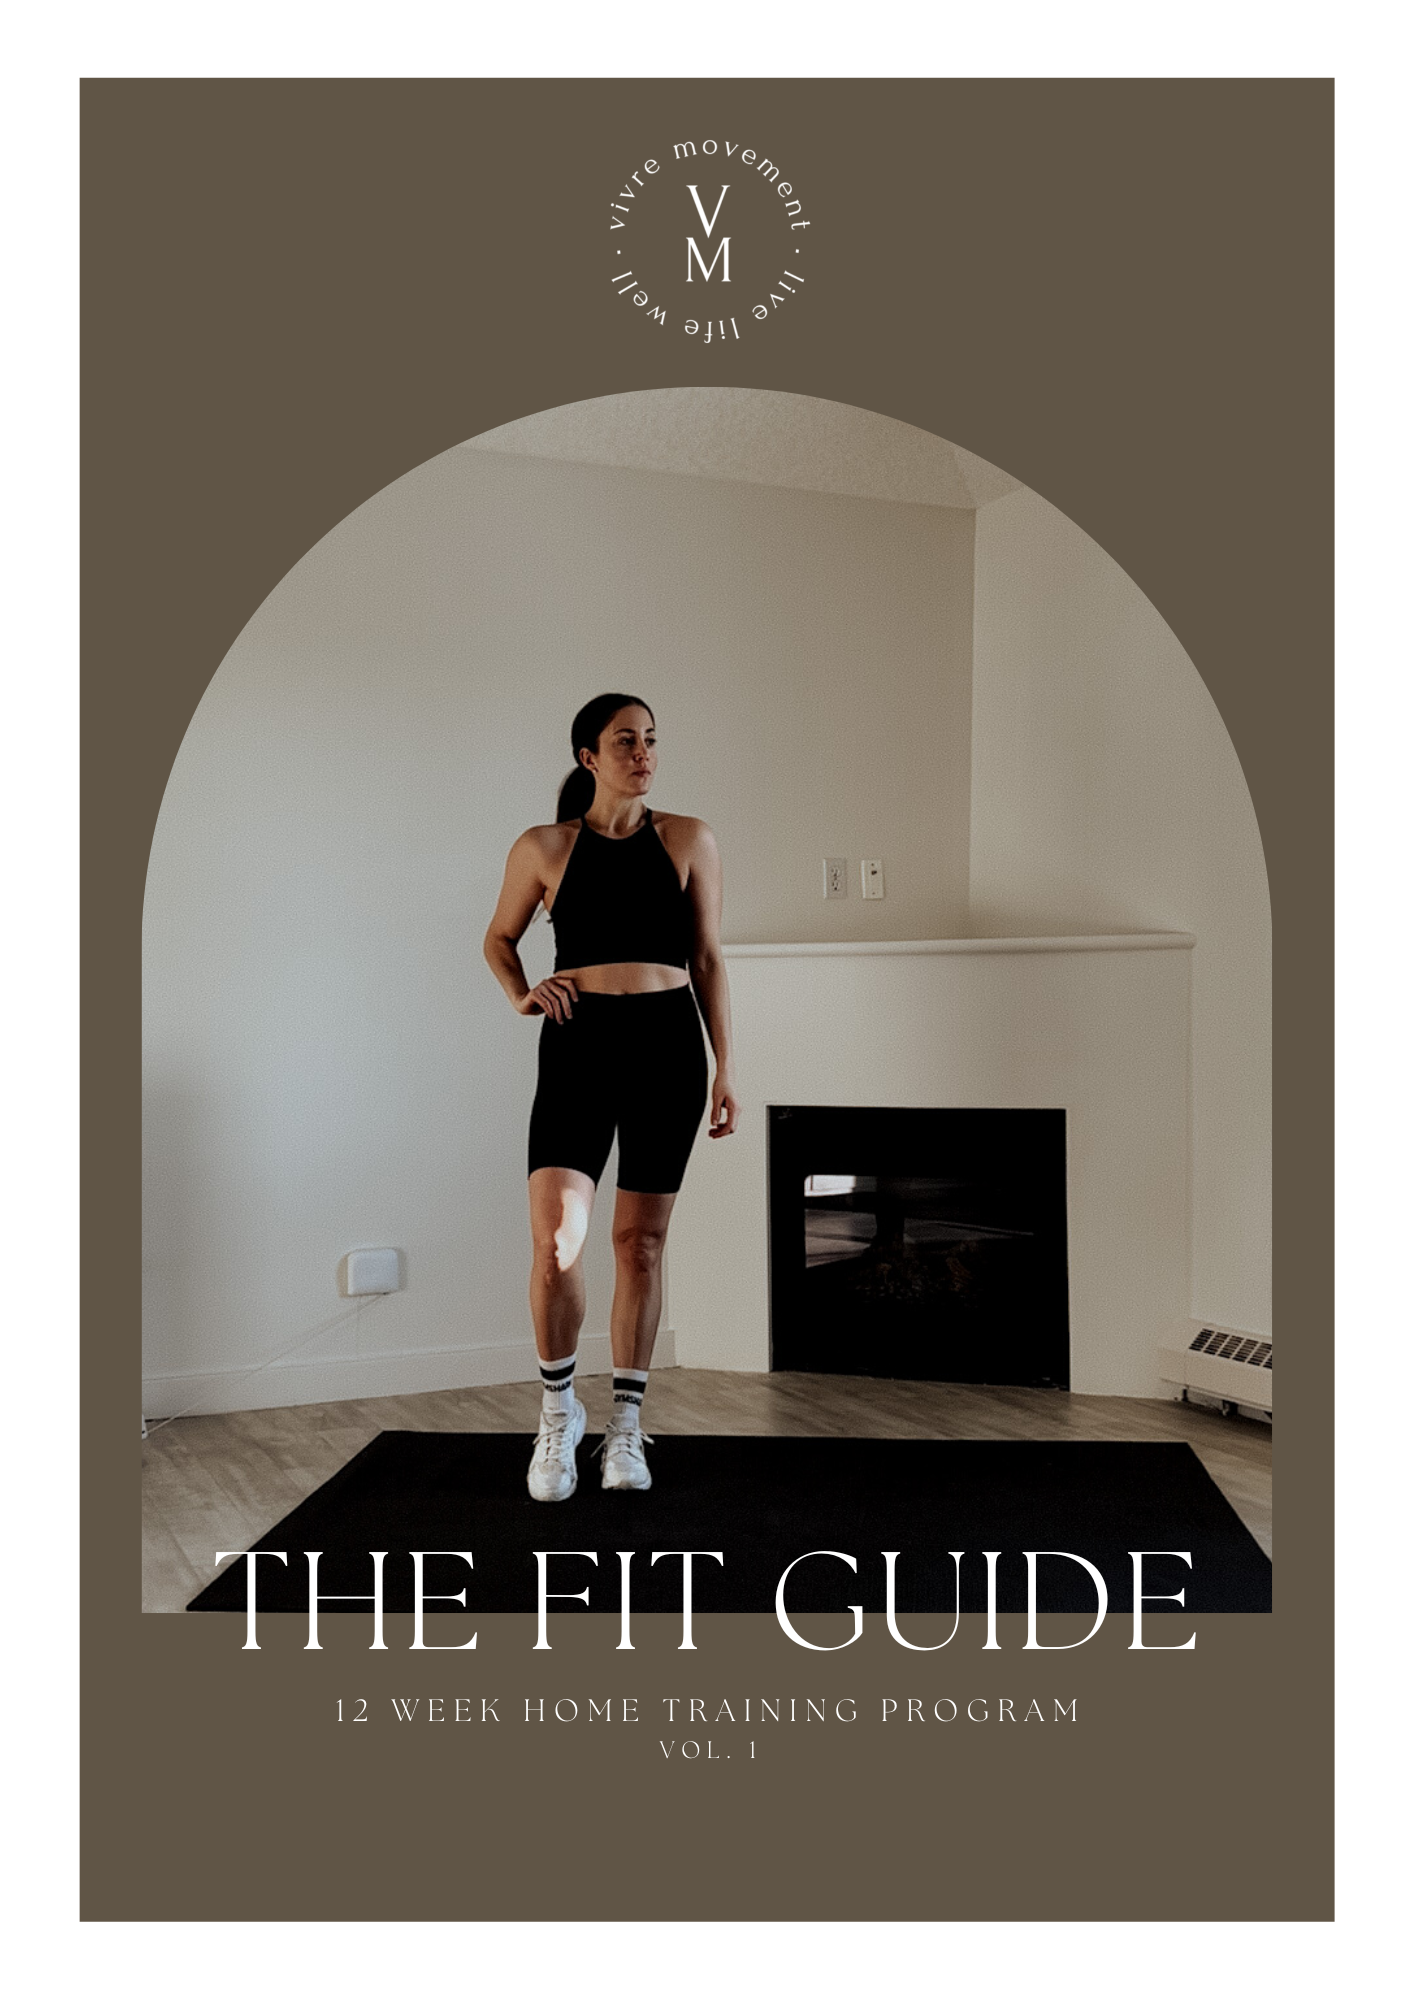 The Fit Guide Vol. 1